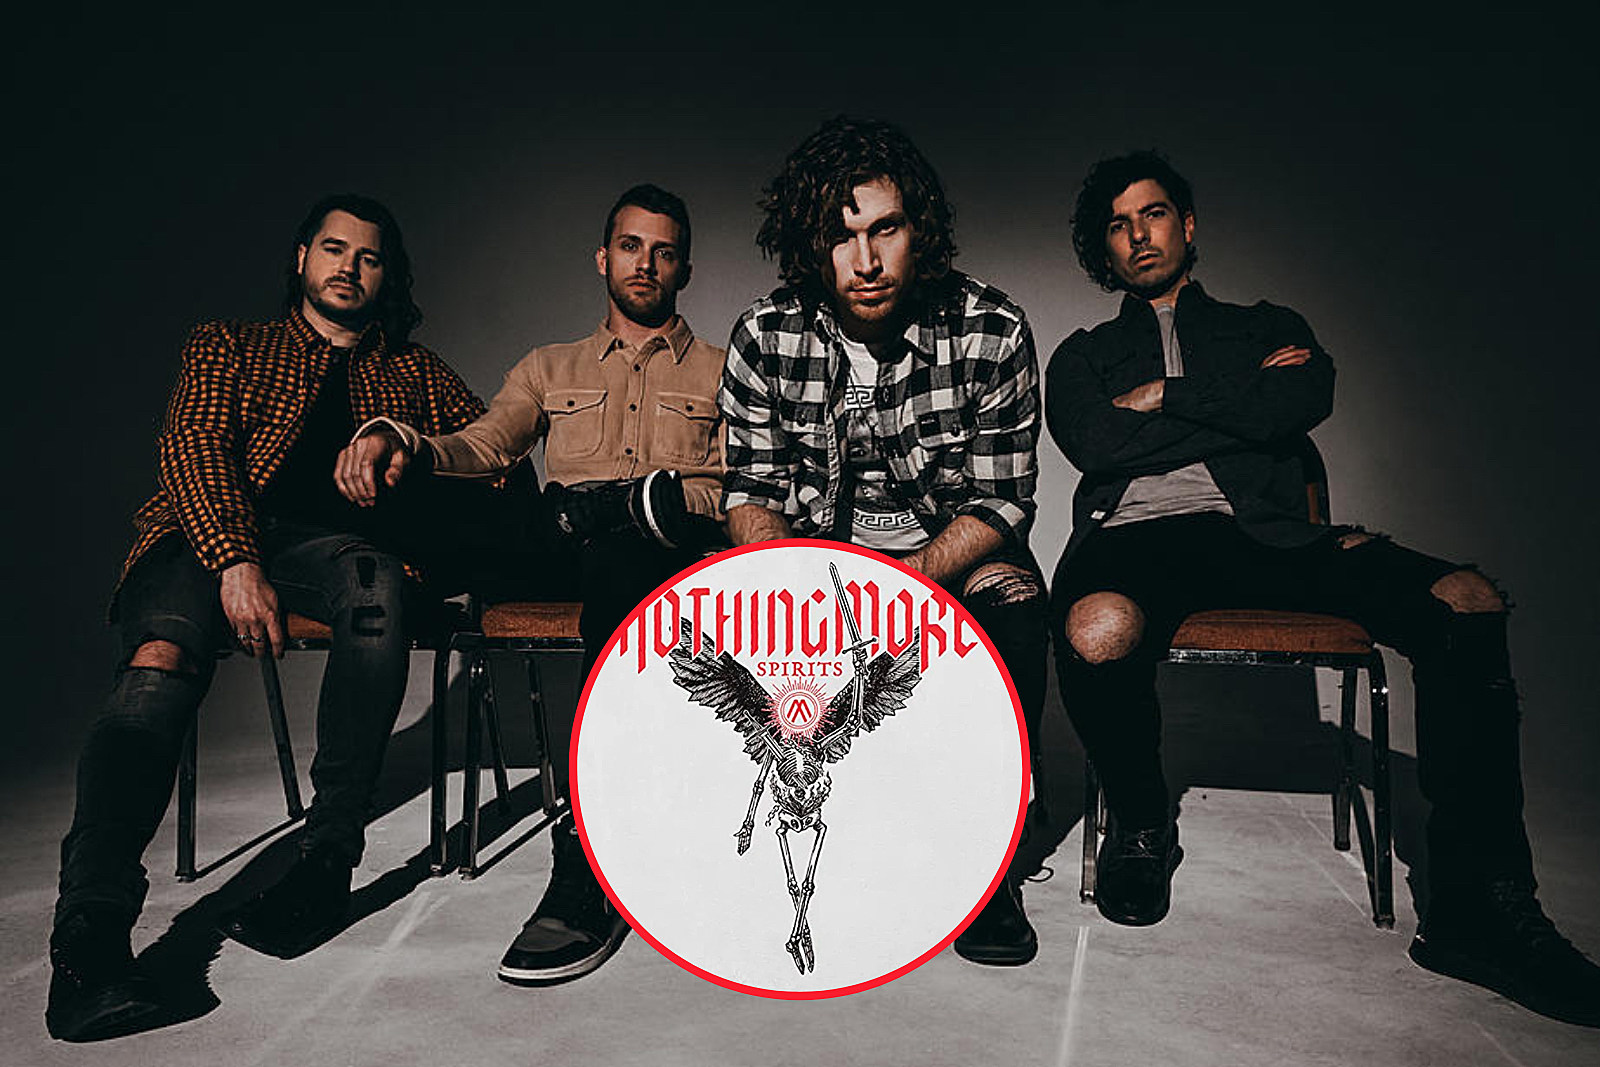 Enter to Win 1-1 Meeting With Nothing More’s Jonny Hawkins